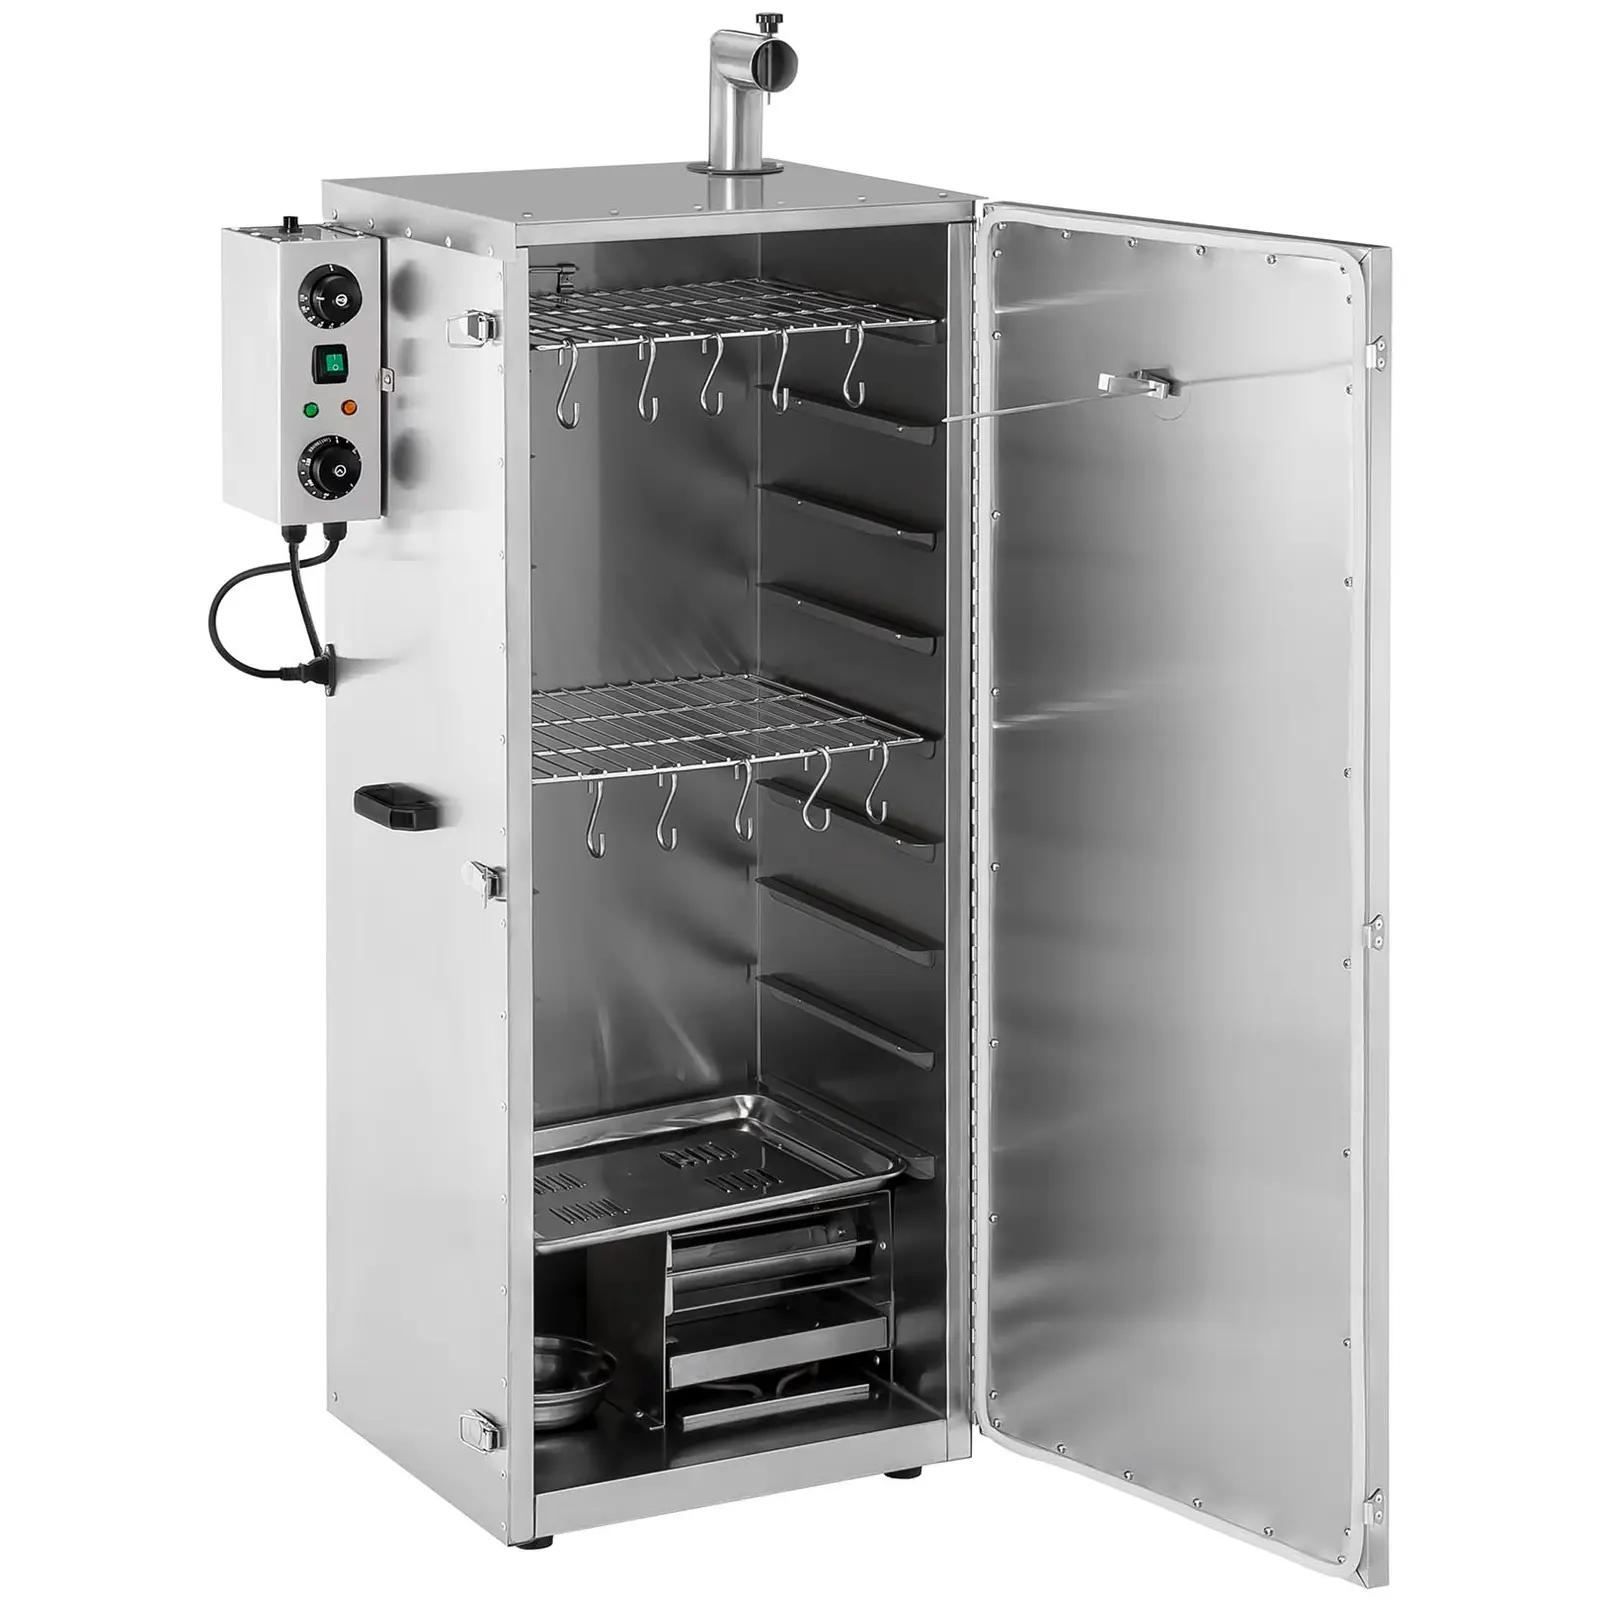 Fumoir professionnel - 147 l - Royal Catering - 8 grilles